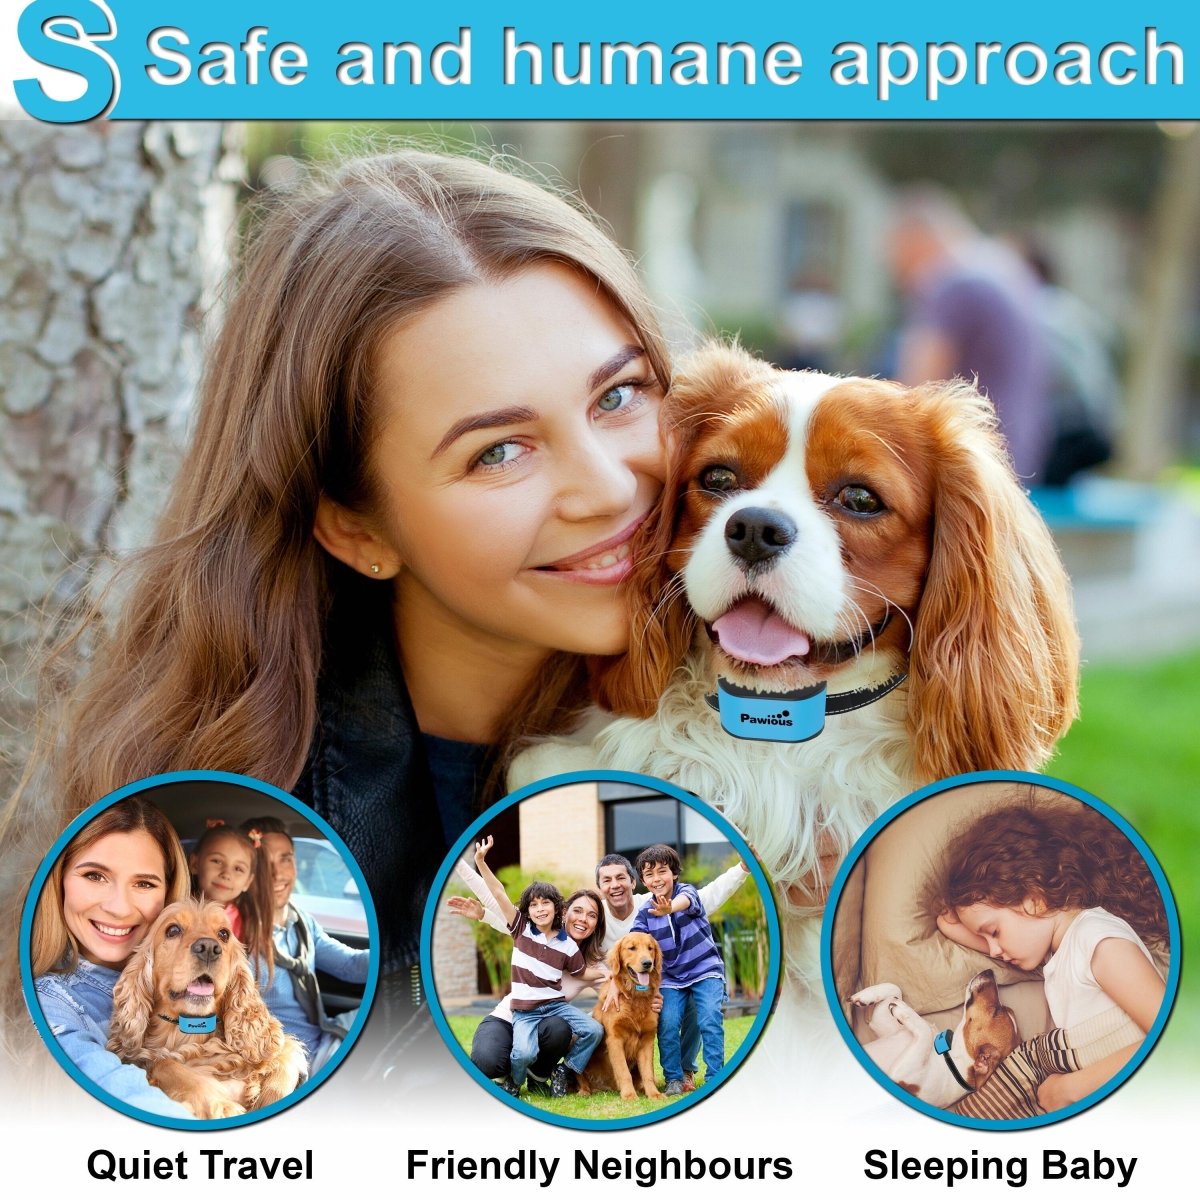 Small Dog Bark Collar - Humane No Shock, No Harmful Prongs, Rechargeable - for Small and Medium Dogs - Pawious